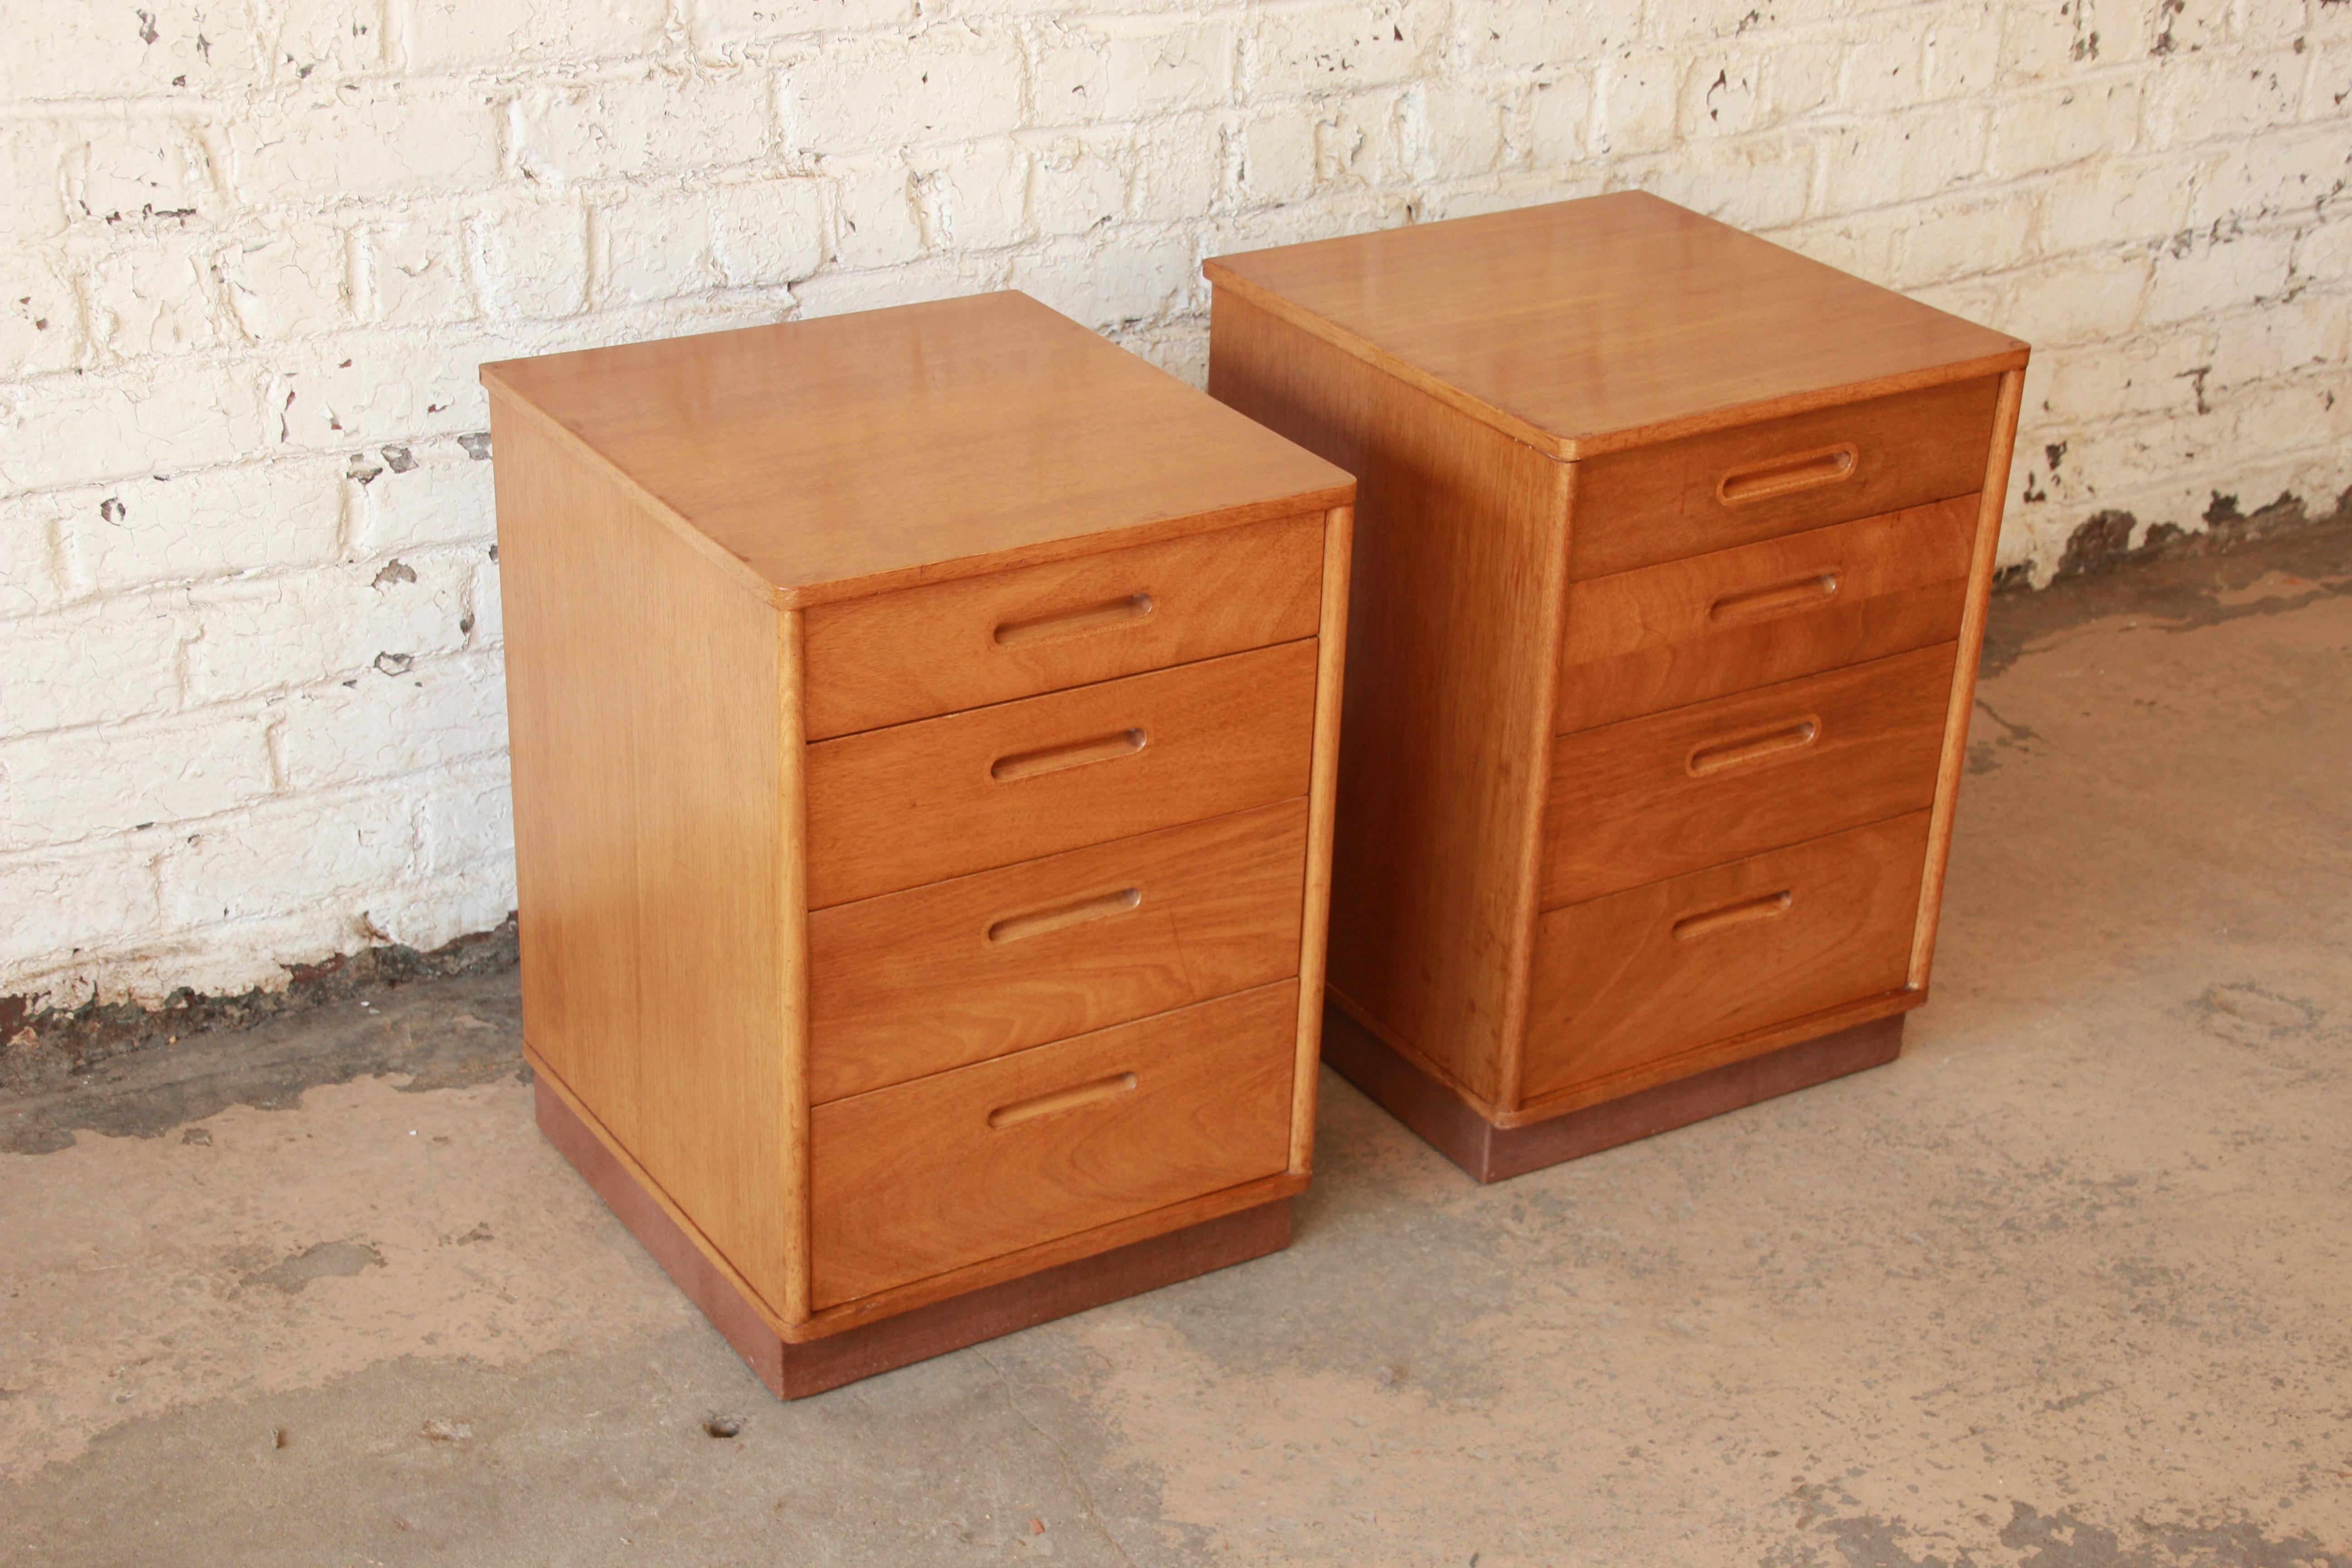 Mid-20th Century Pair of Edward Wormley for Dunbar Mid-Century Nightstands or Chests of Drawers